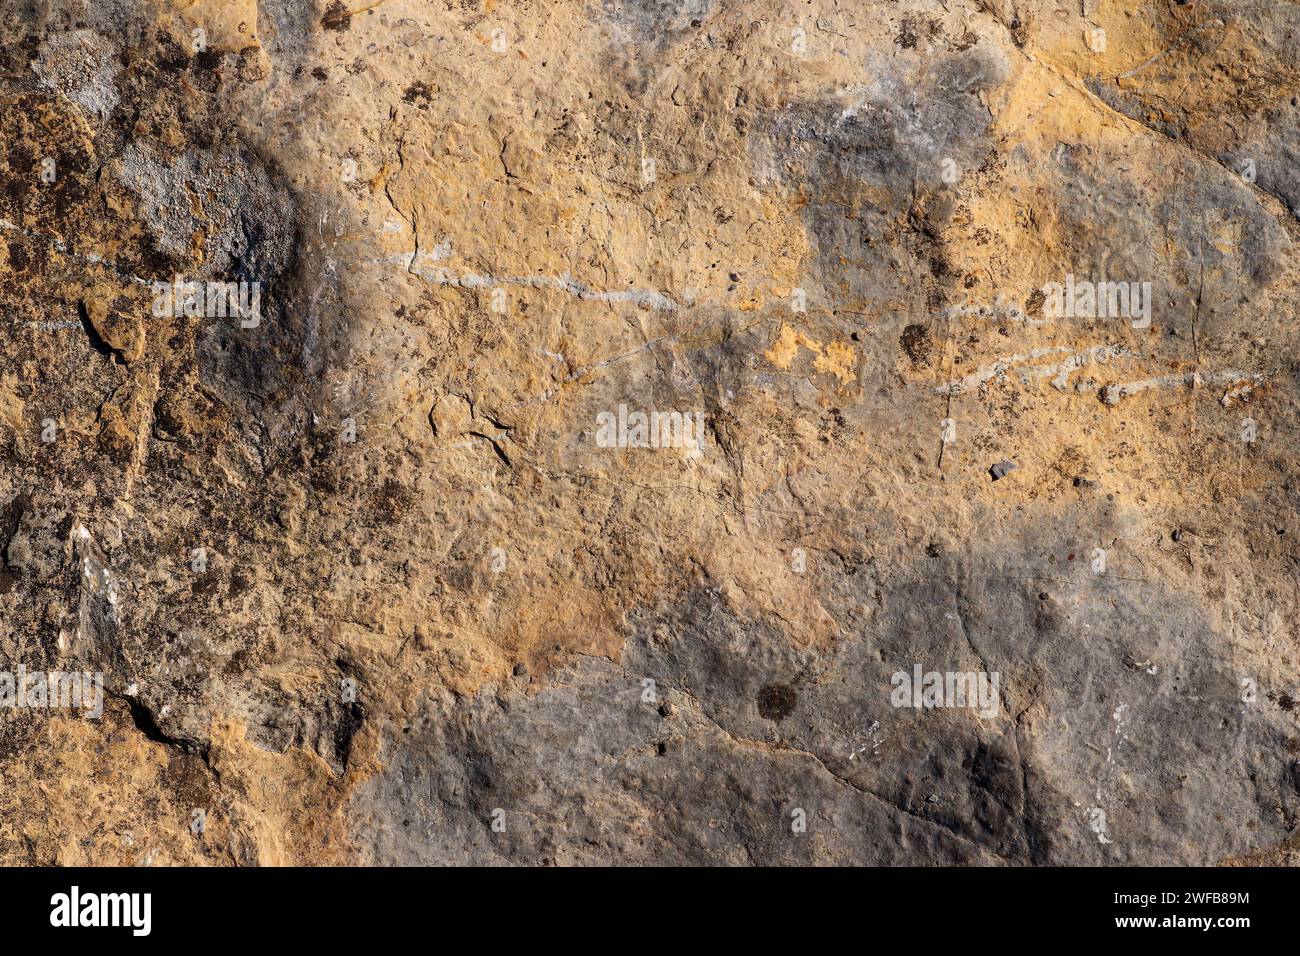 Weathered surface of sandstone rock, natural texture Stock Photo